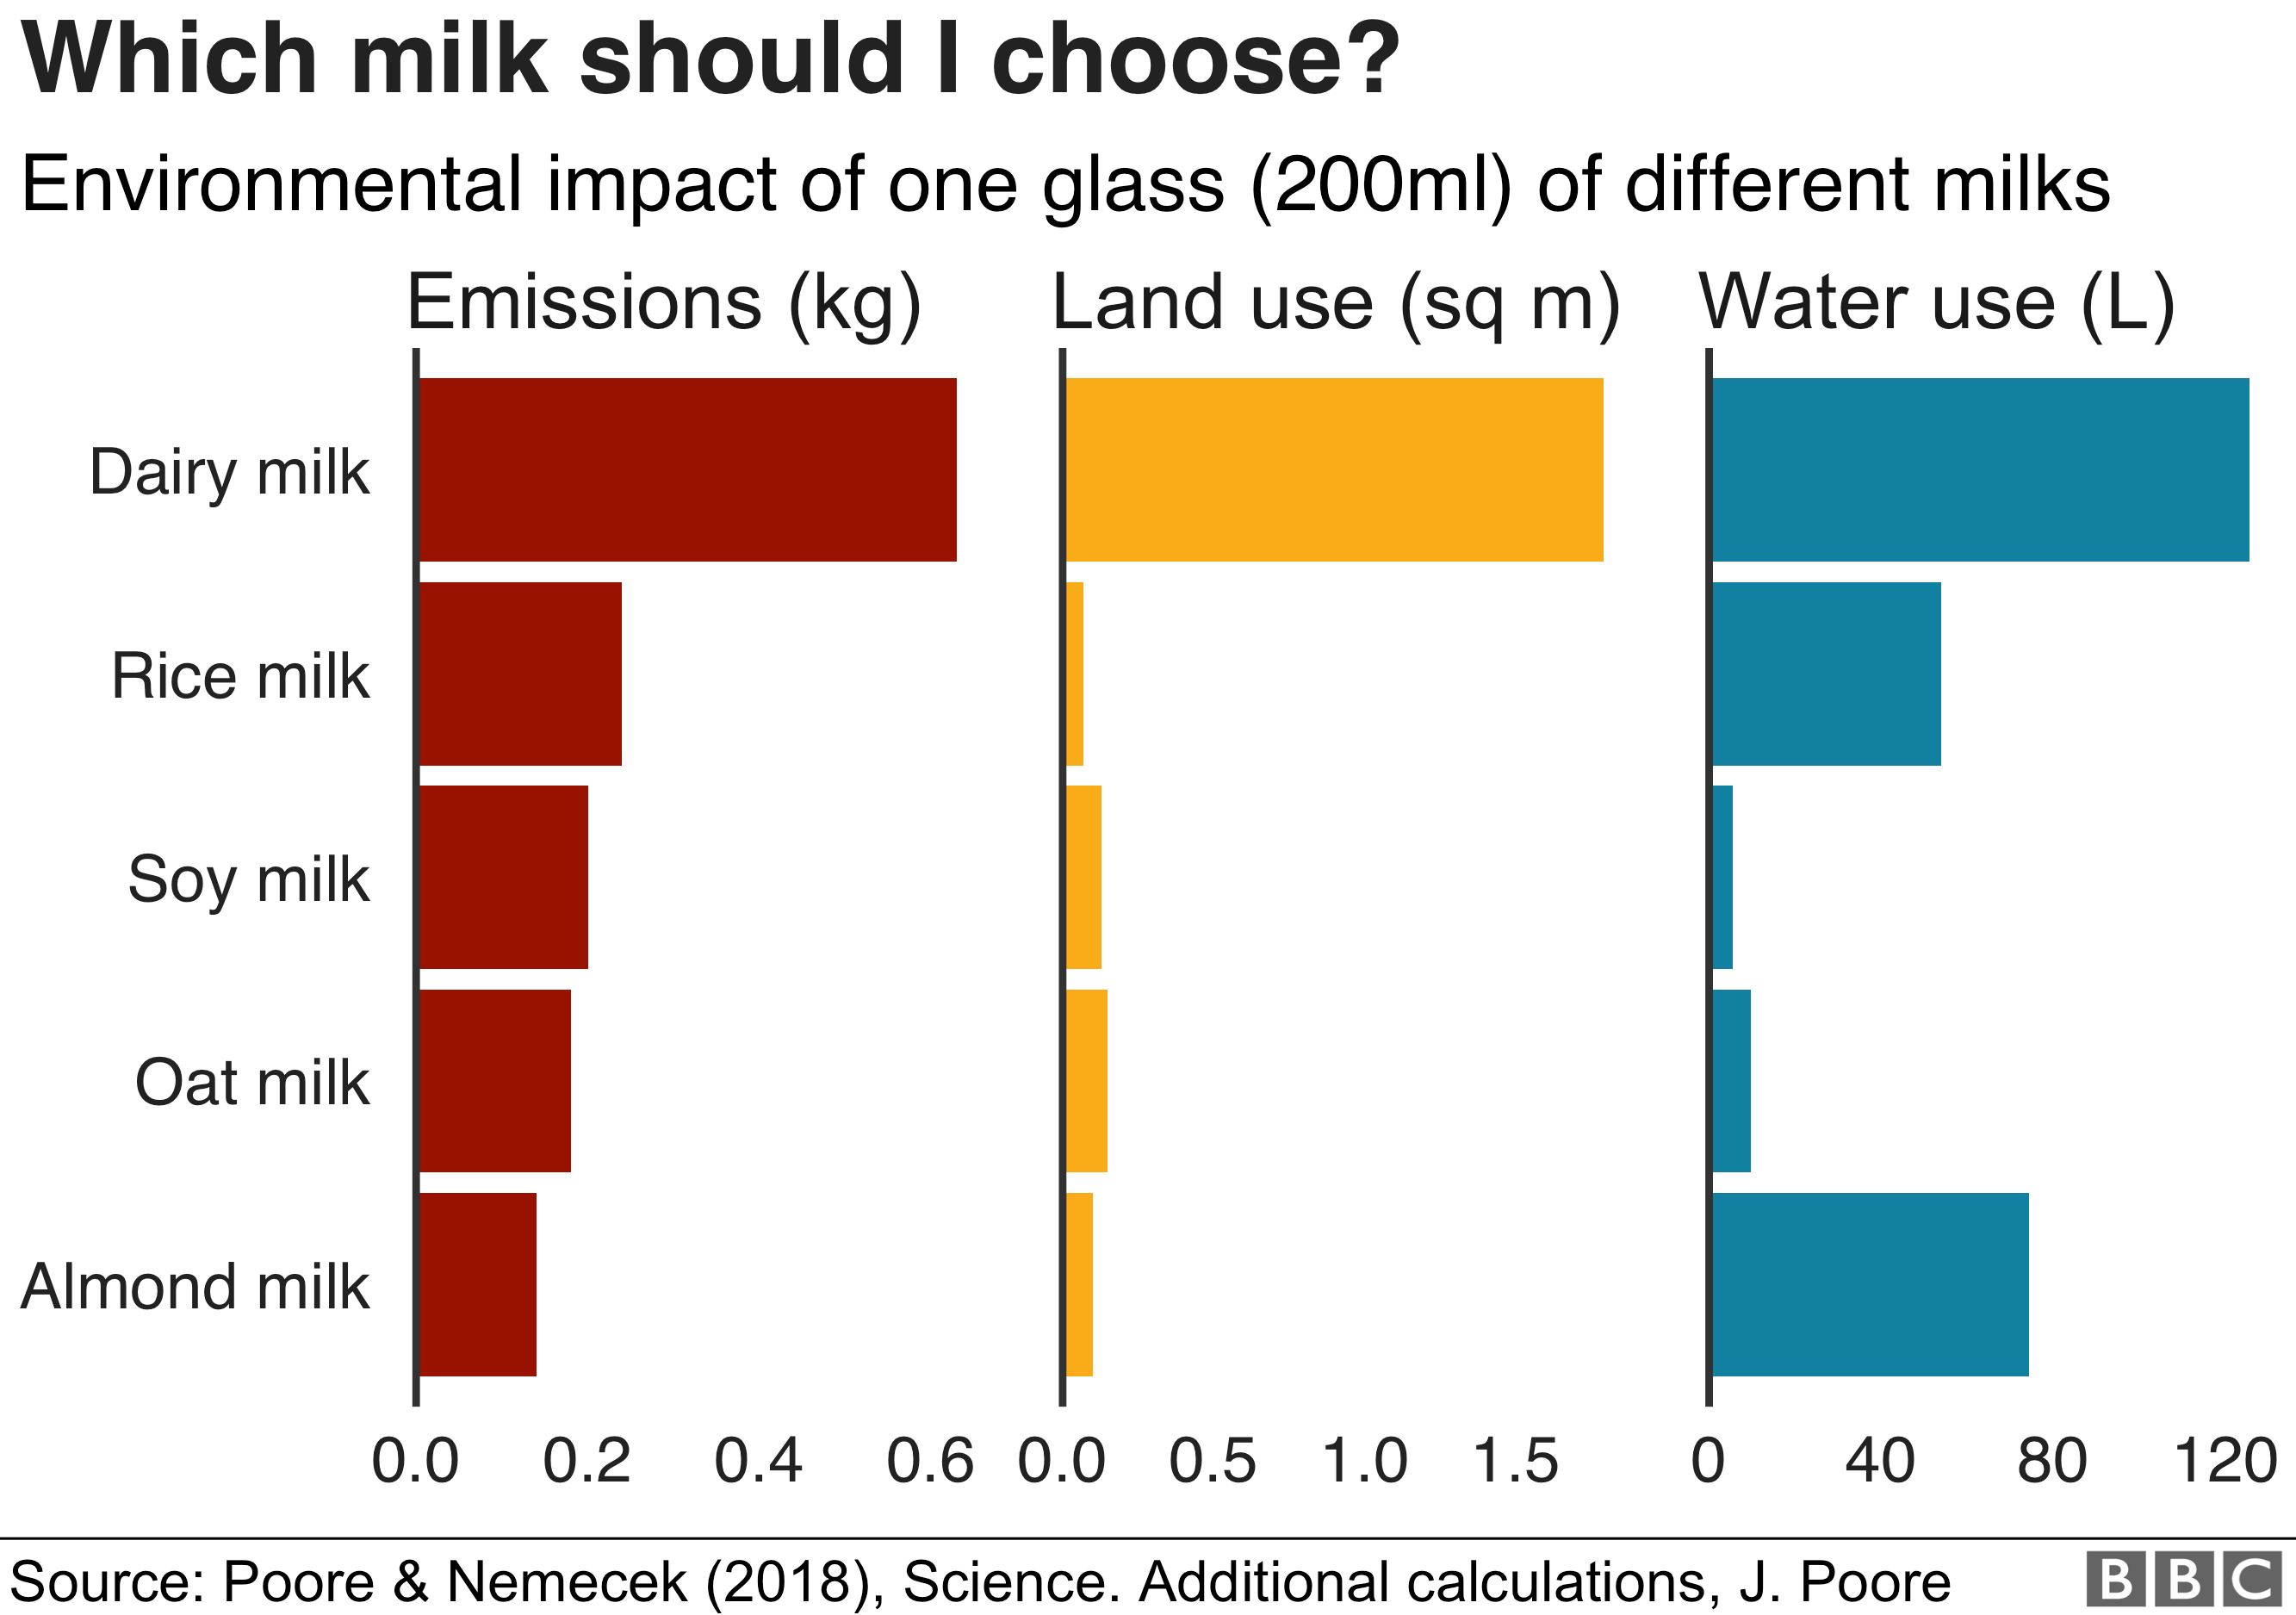 Chart on the environmental impact of one glass of different milks.